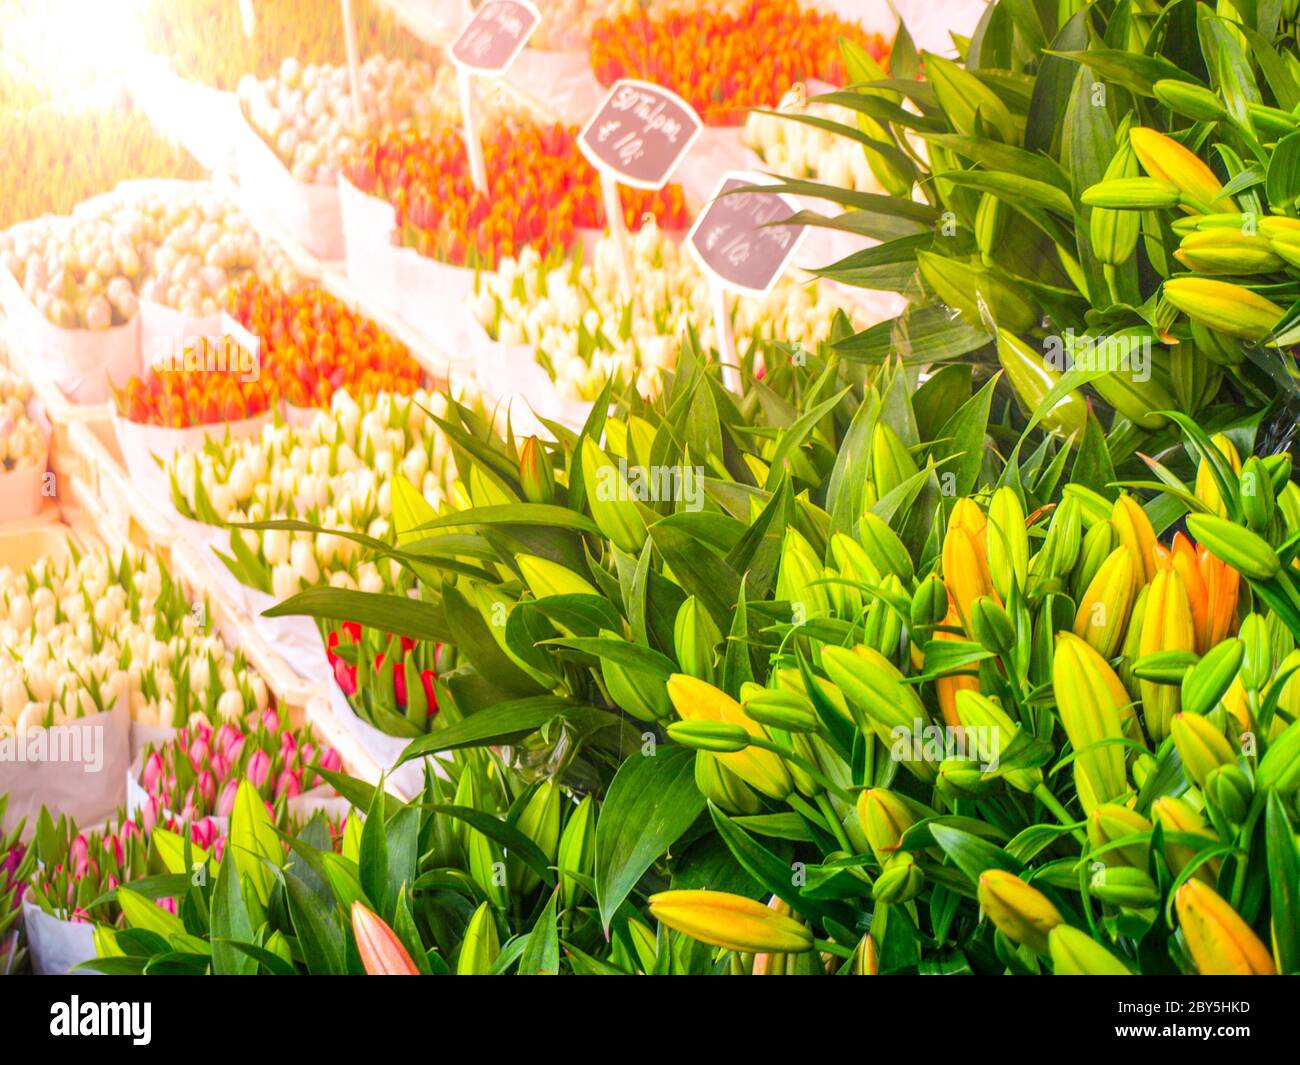 Dutch tulip market. Multicolored flowers for sale, Amsterdam, Netherlands Stock Photo